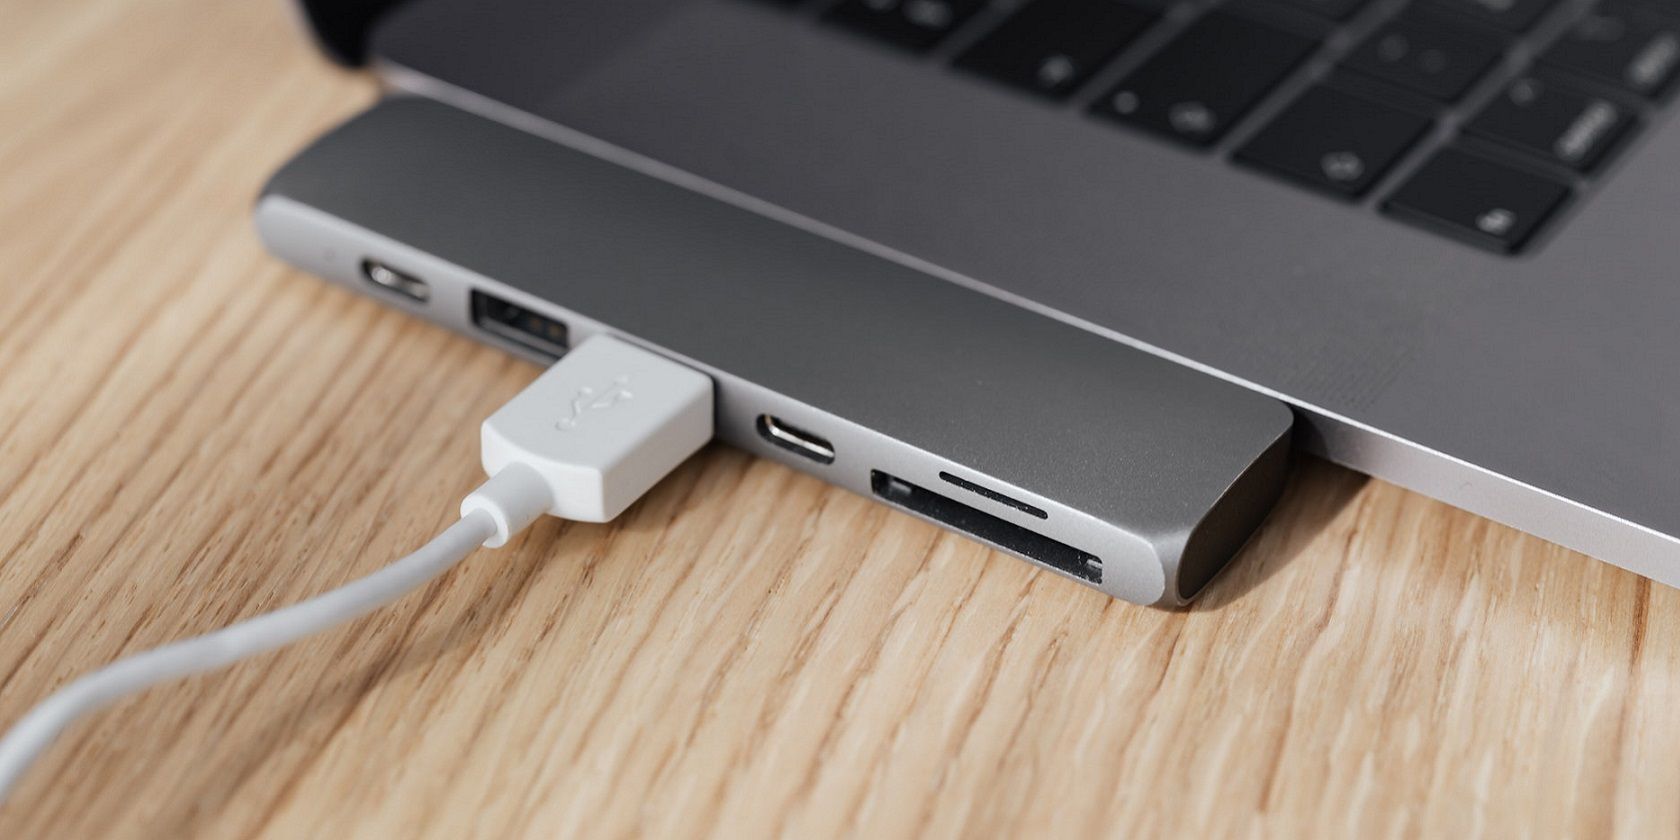 a usb drive cable